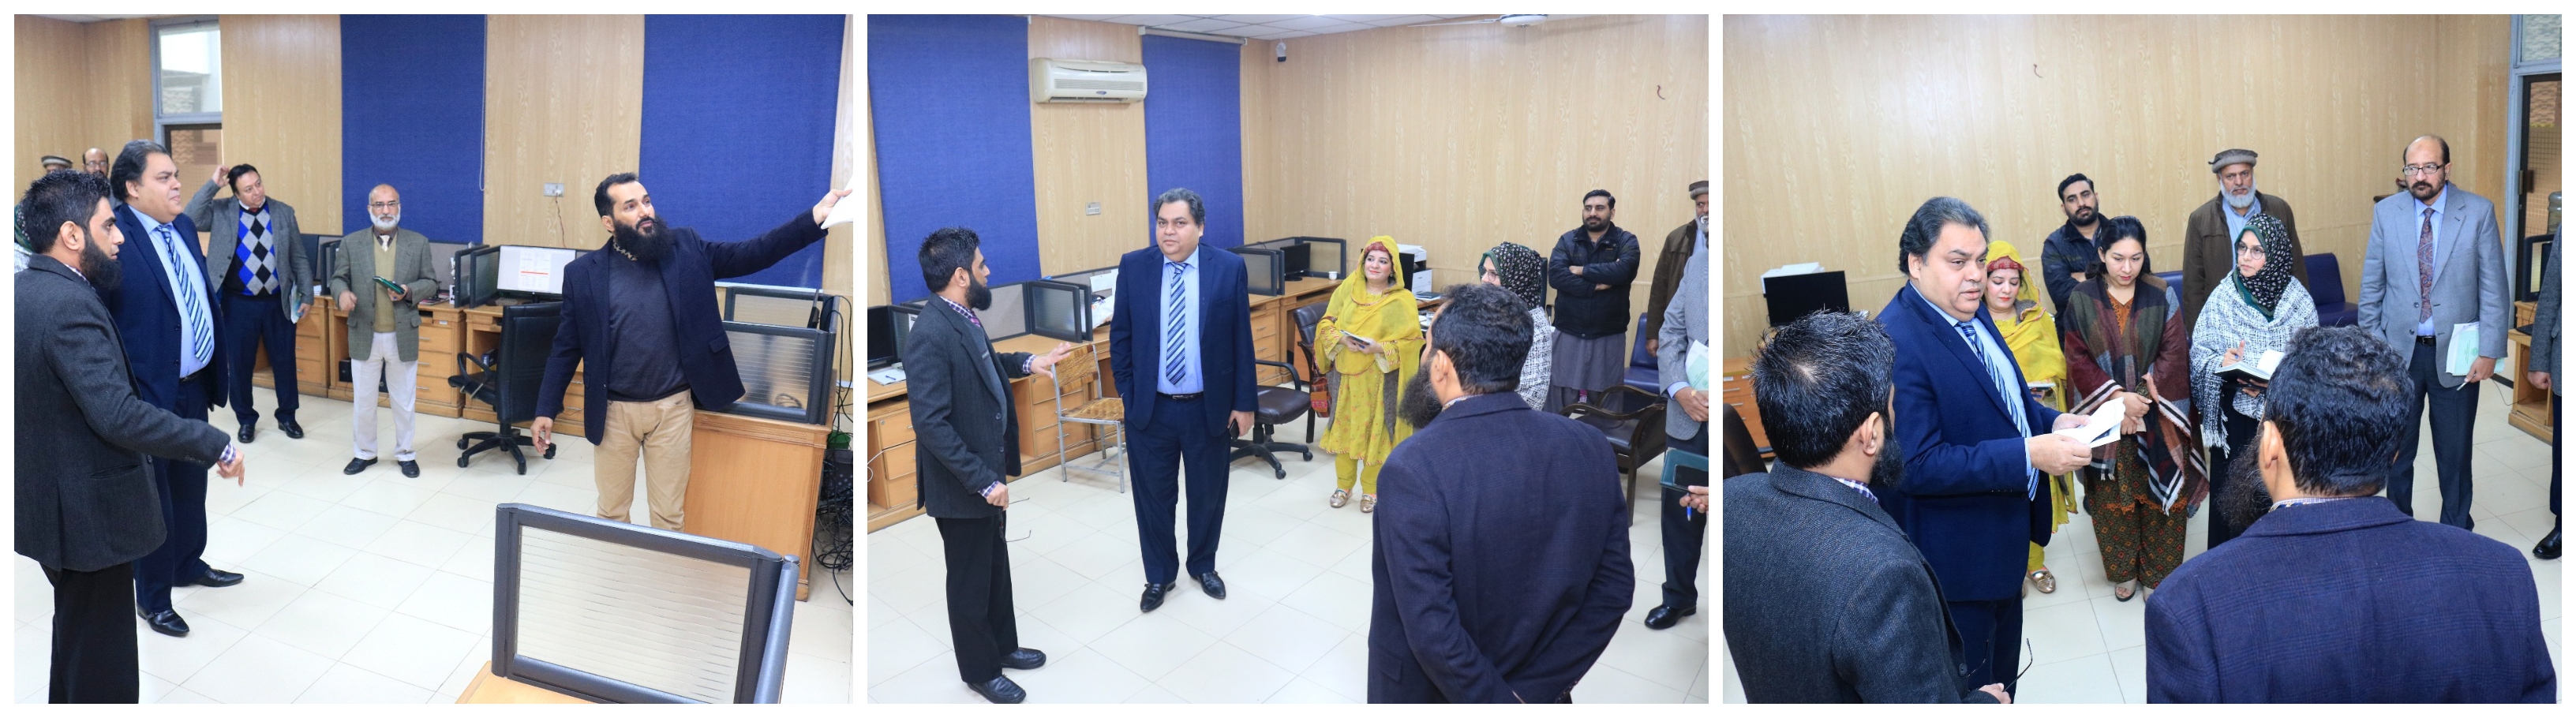 The DG, QAED Punjab paid a visit to the monitoring room